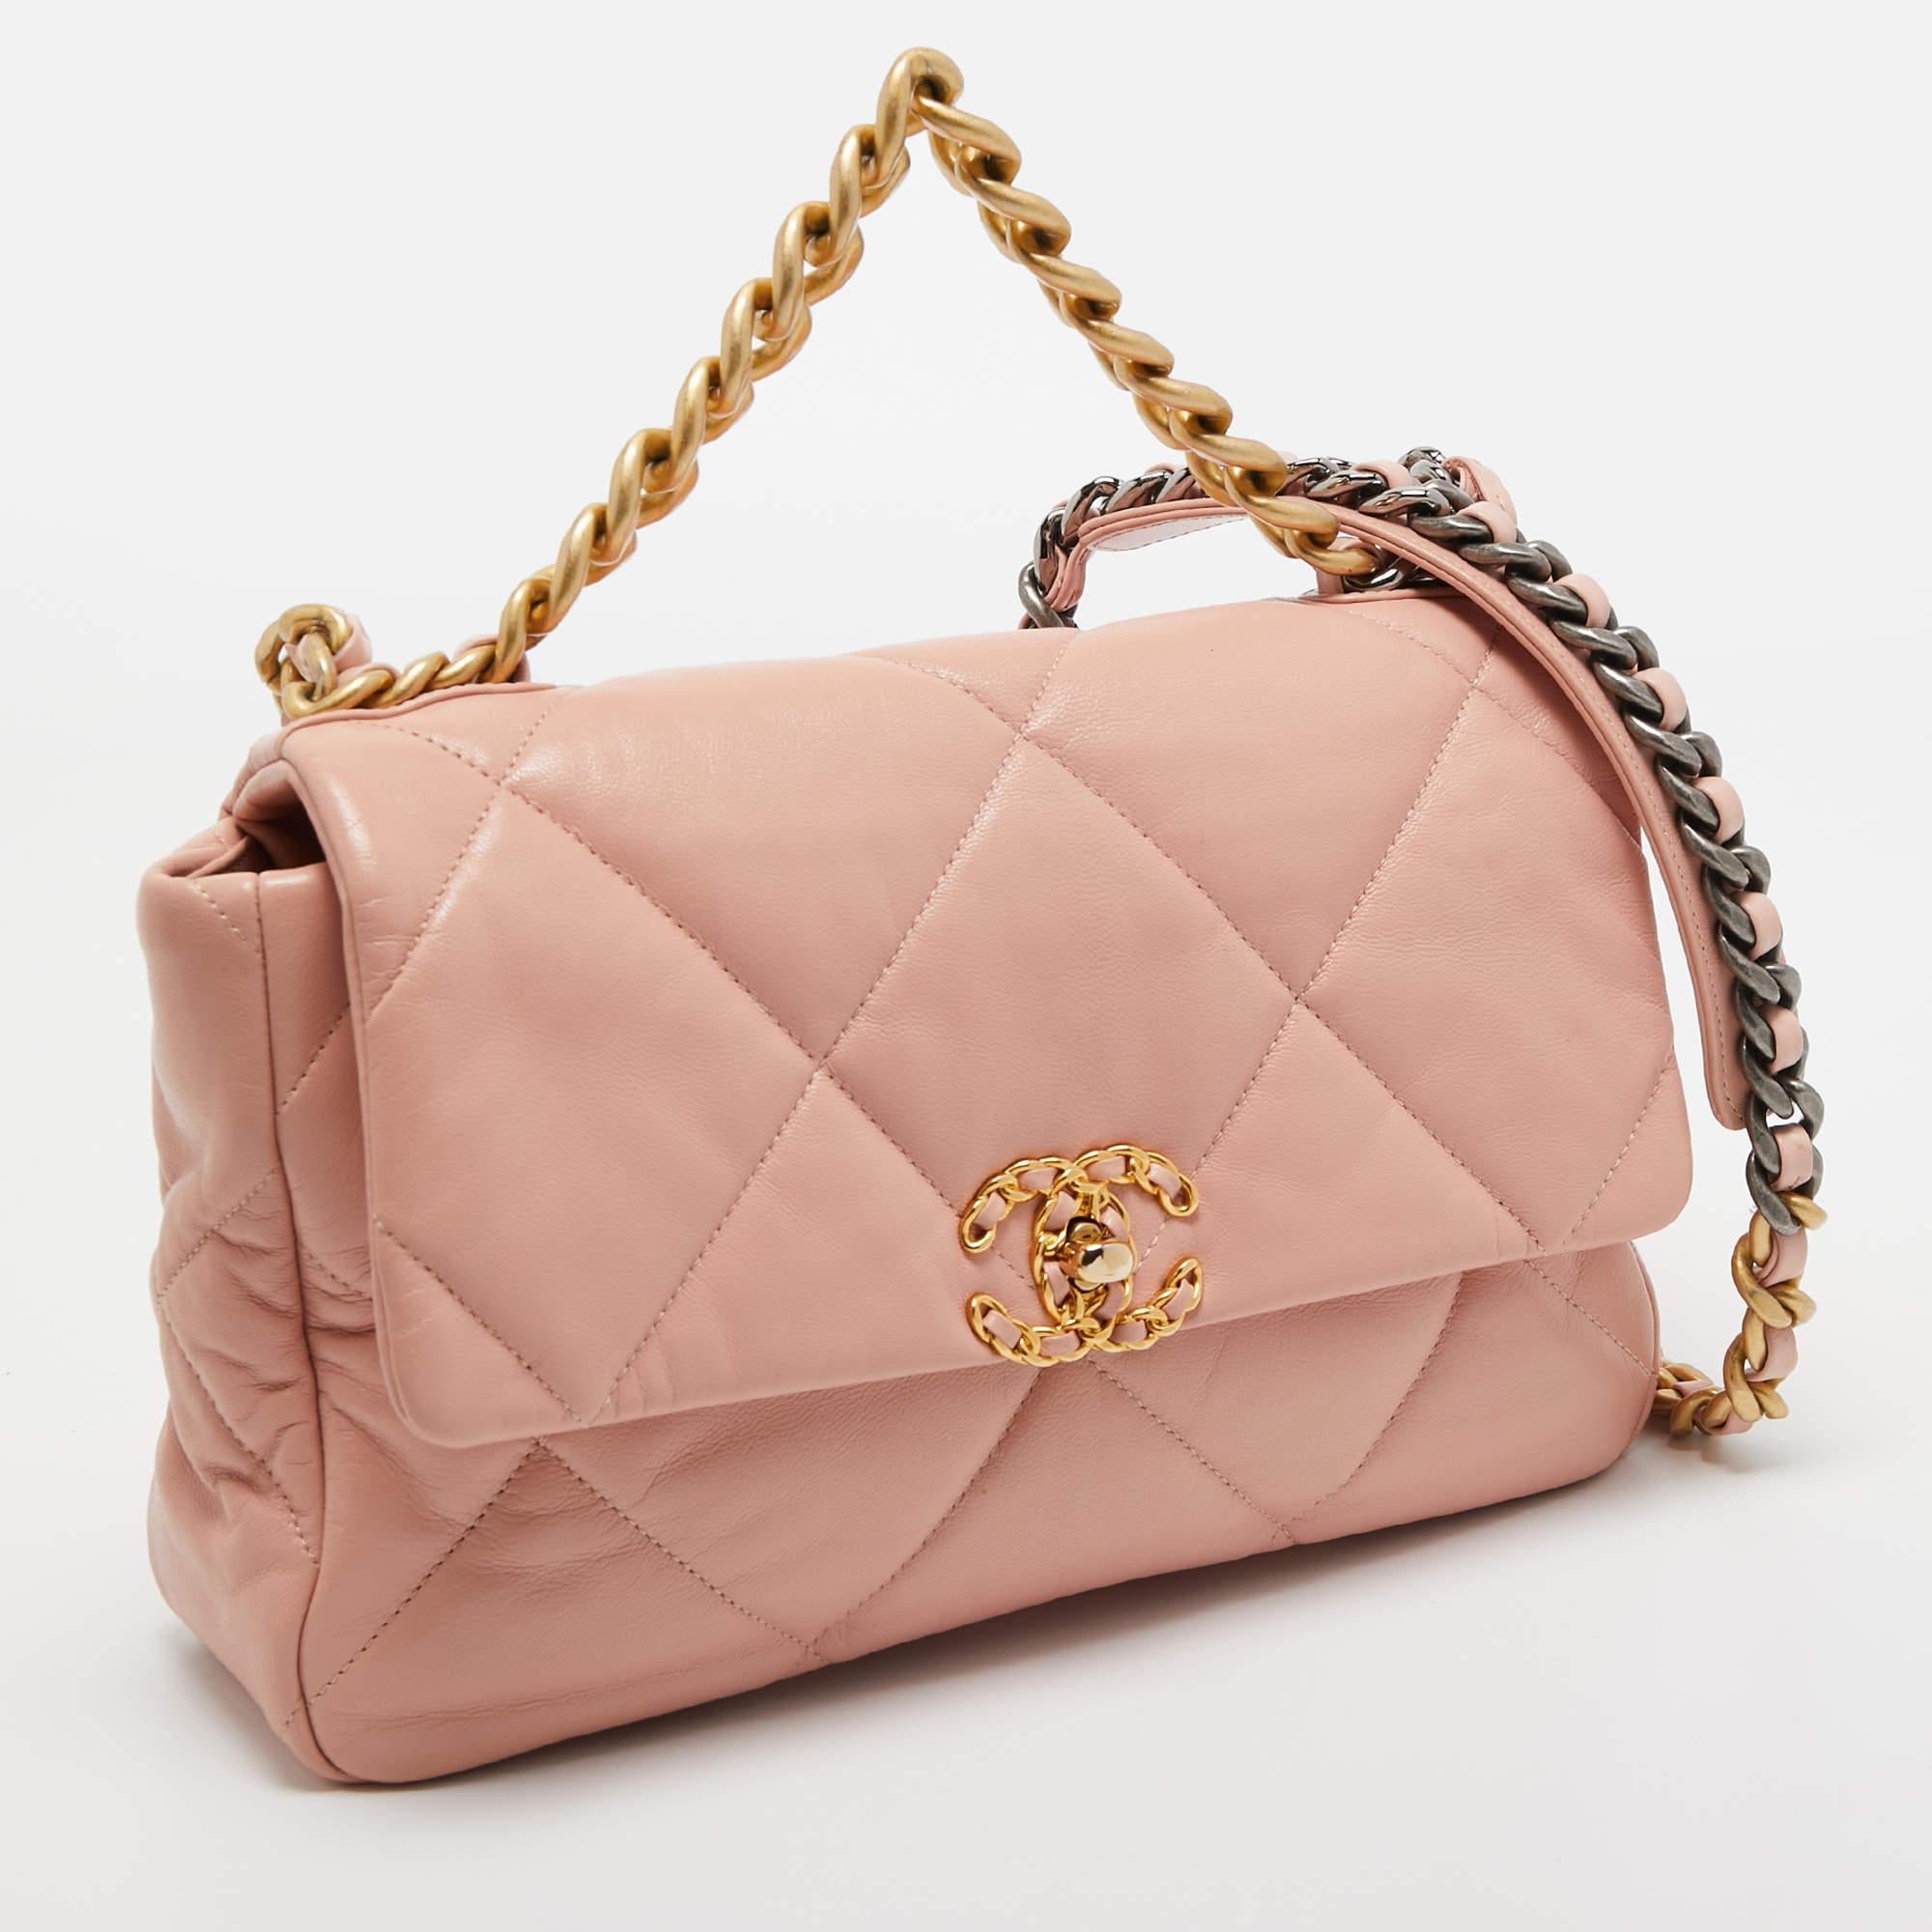 Women's Chanel Pink Quilted Leather Large 19 Flap Bag For Sale